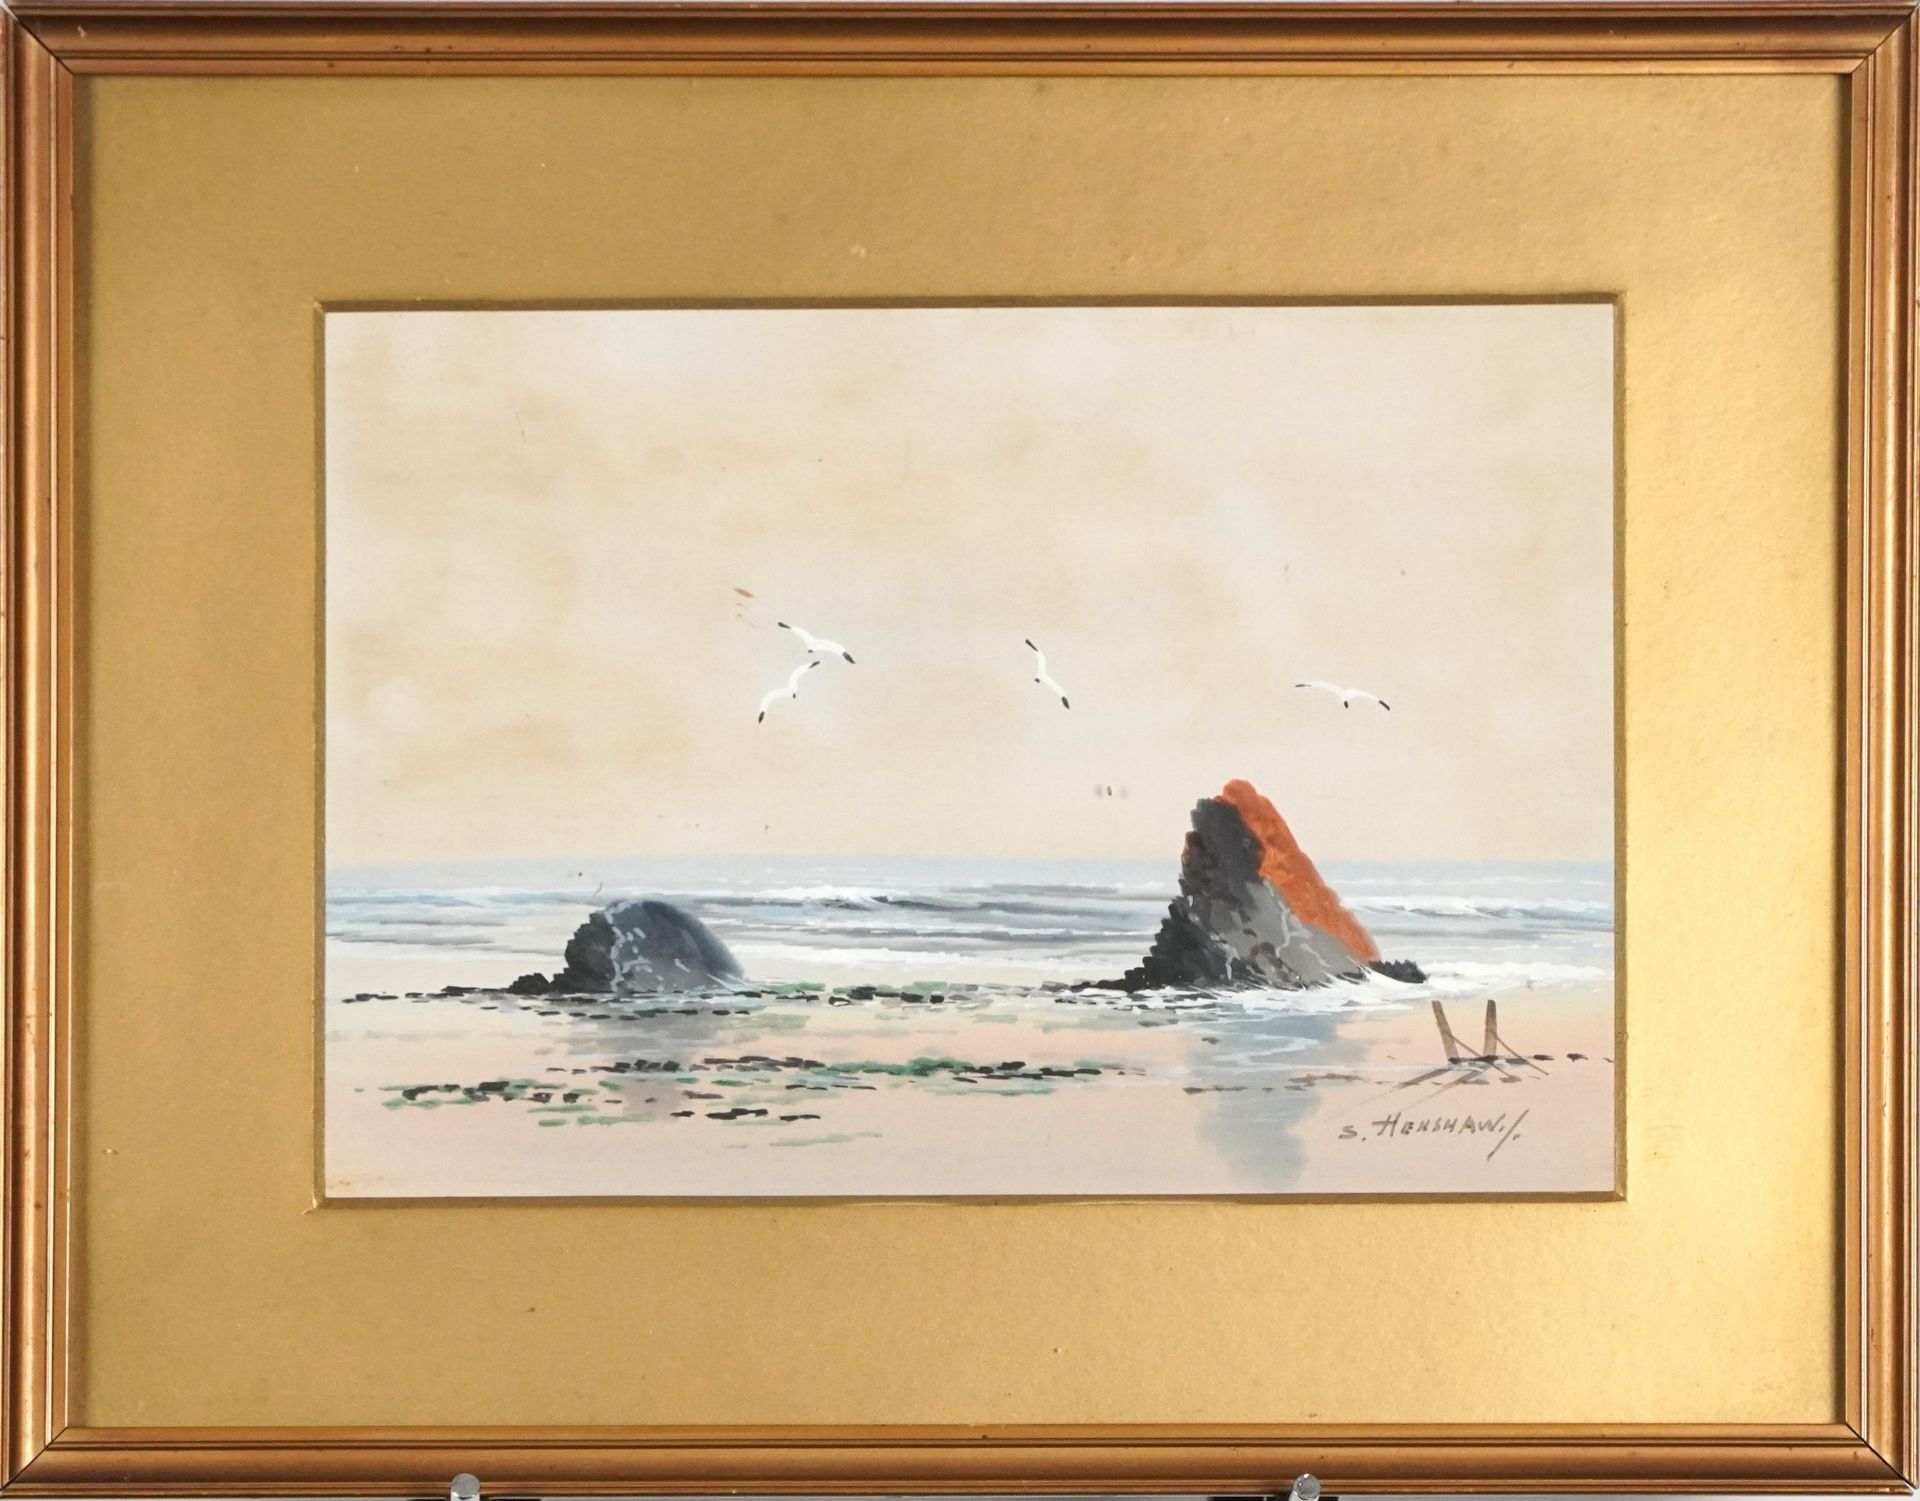 S Henshaw - Coastal scenes, pair of heightened watercolours, mounted, framed and glazed, each 24.5cm - Image 3 of 9